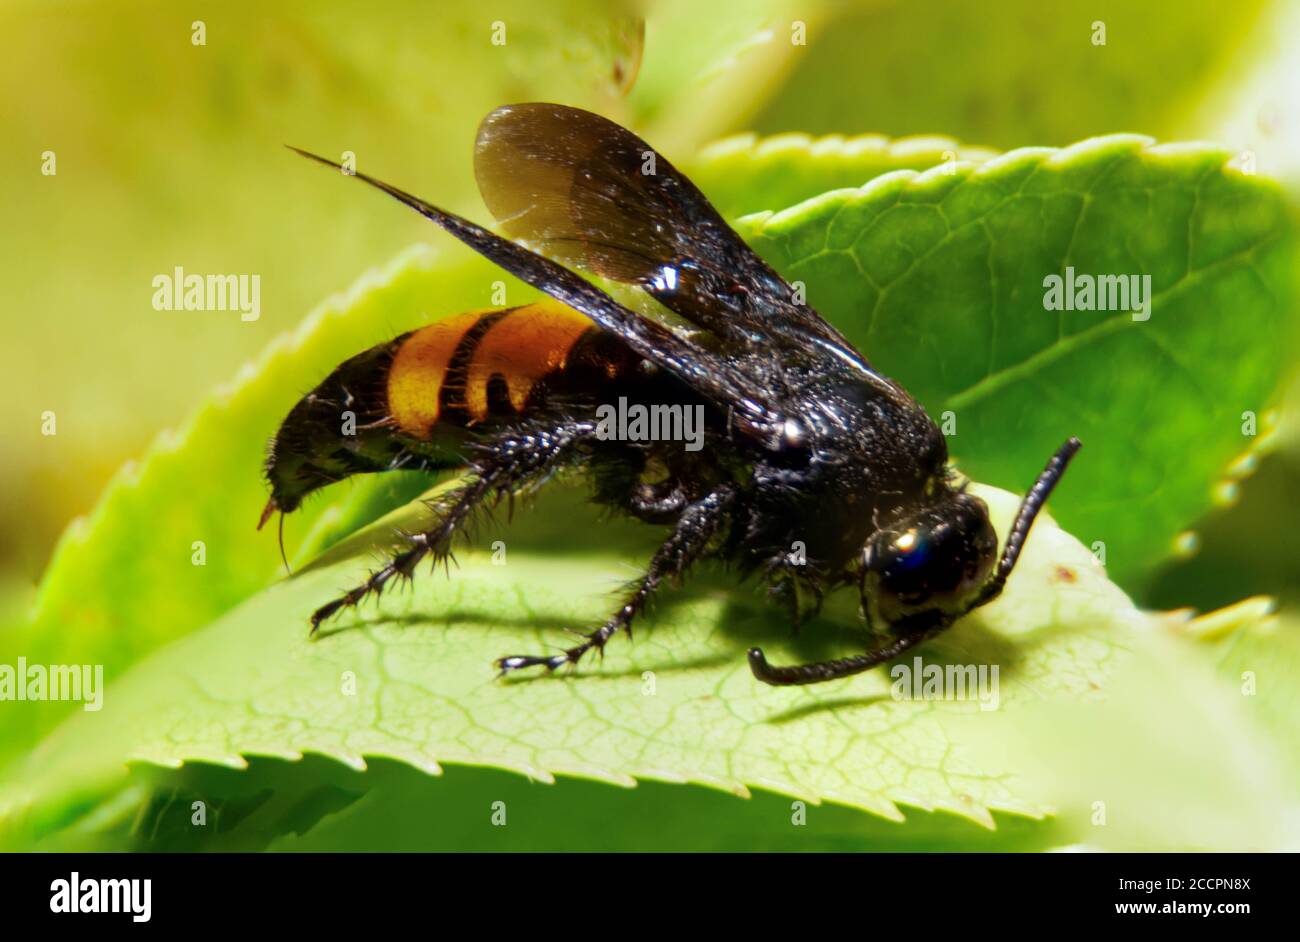 Closeup of an Asian Giant Hornet Insect with Sting Stock Photo